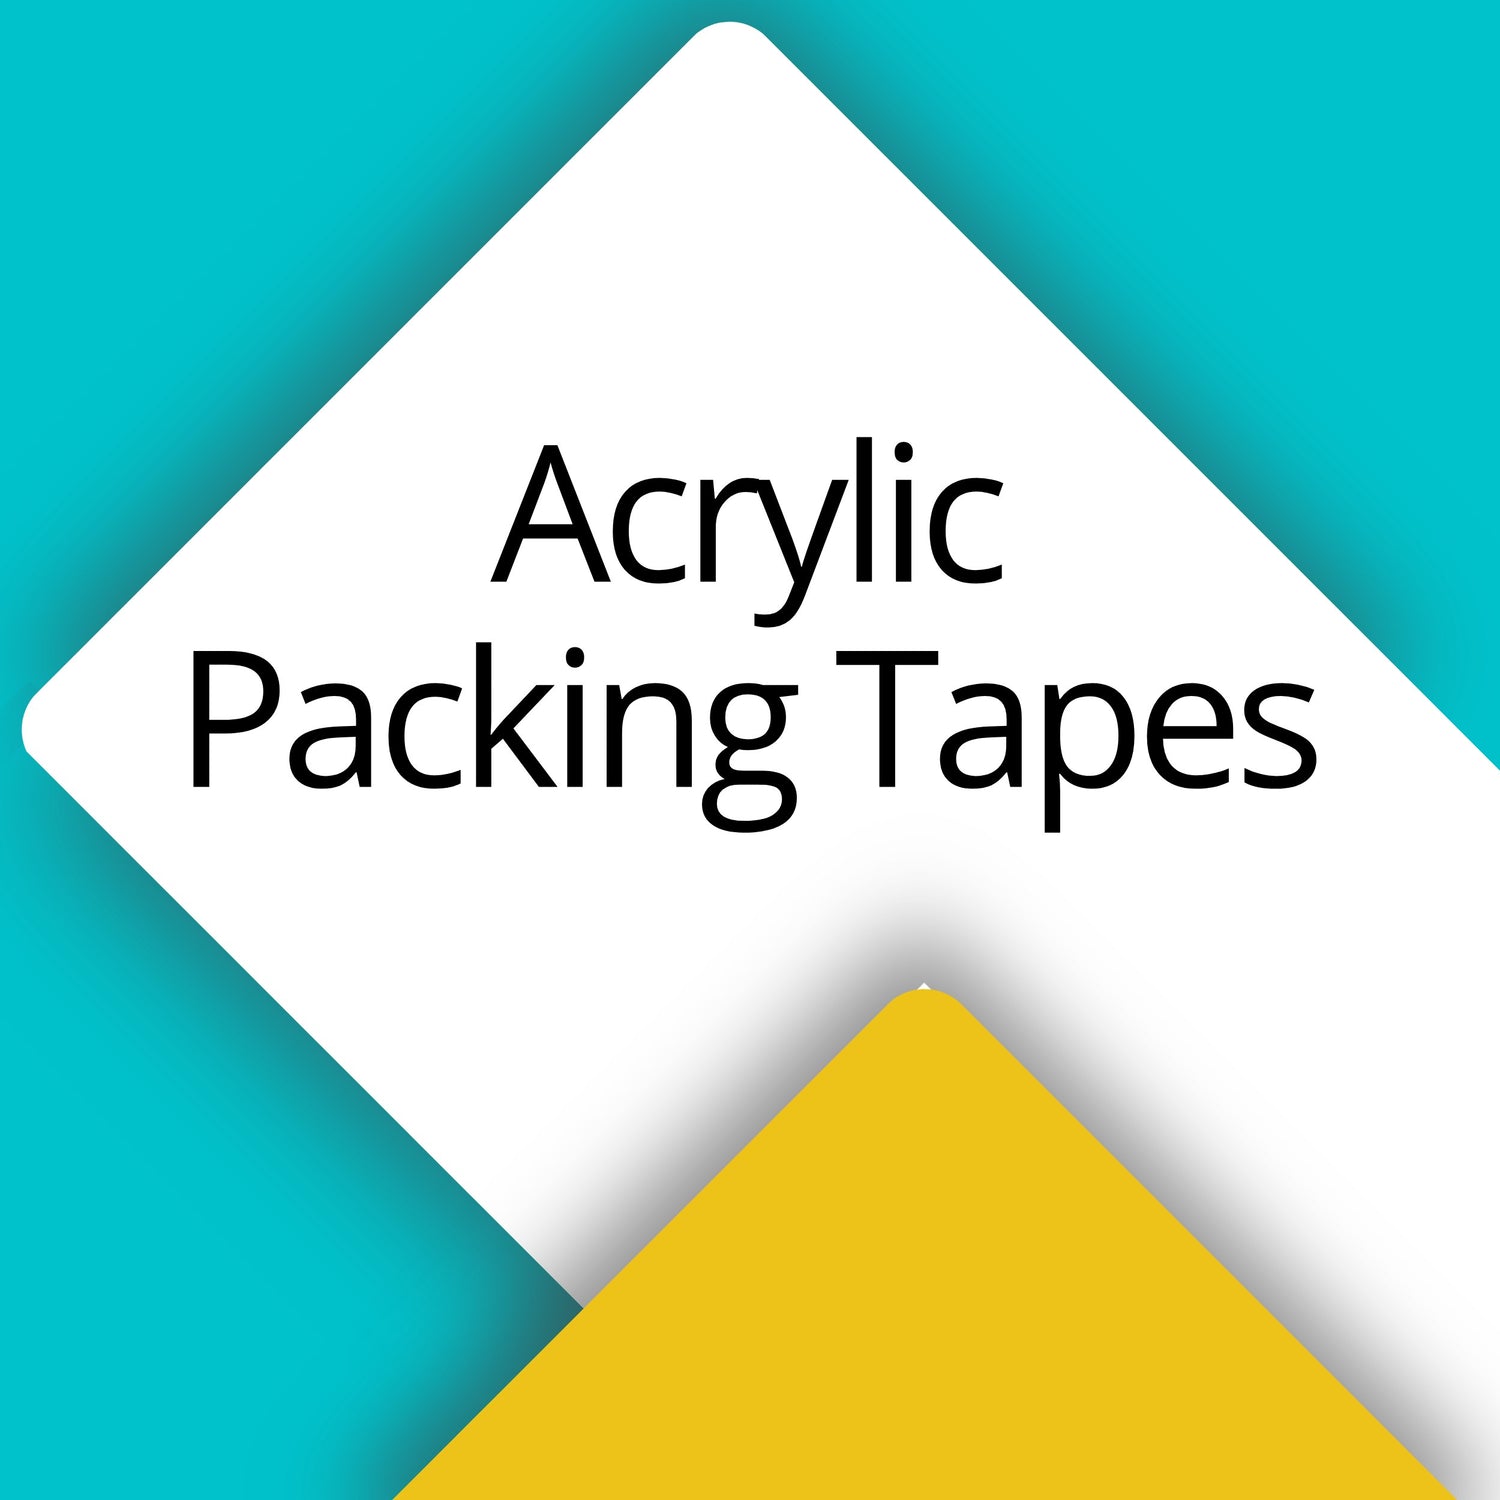 Hot Pawz Packing Tapes Acrylic Packaging Tapes